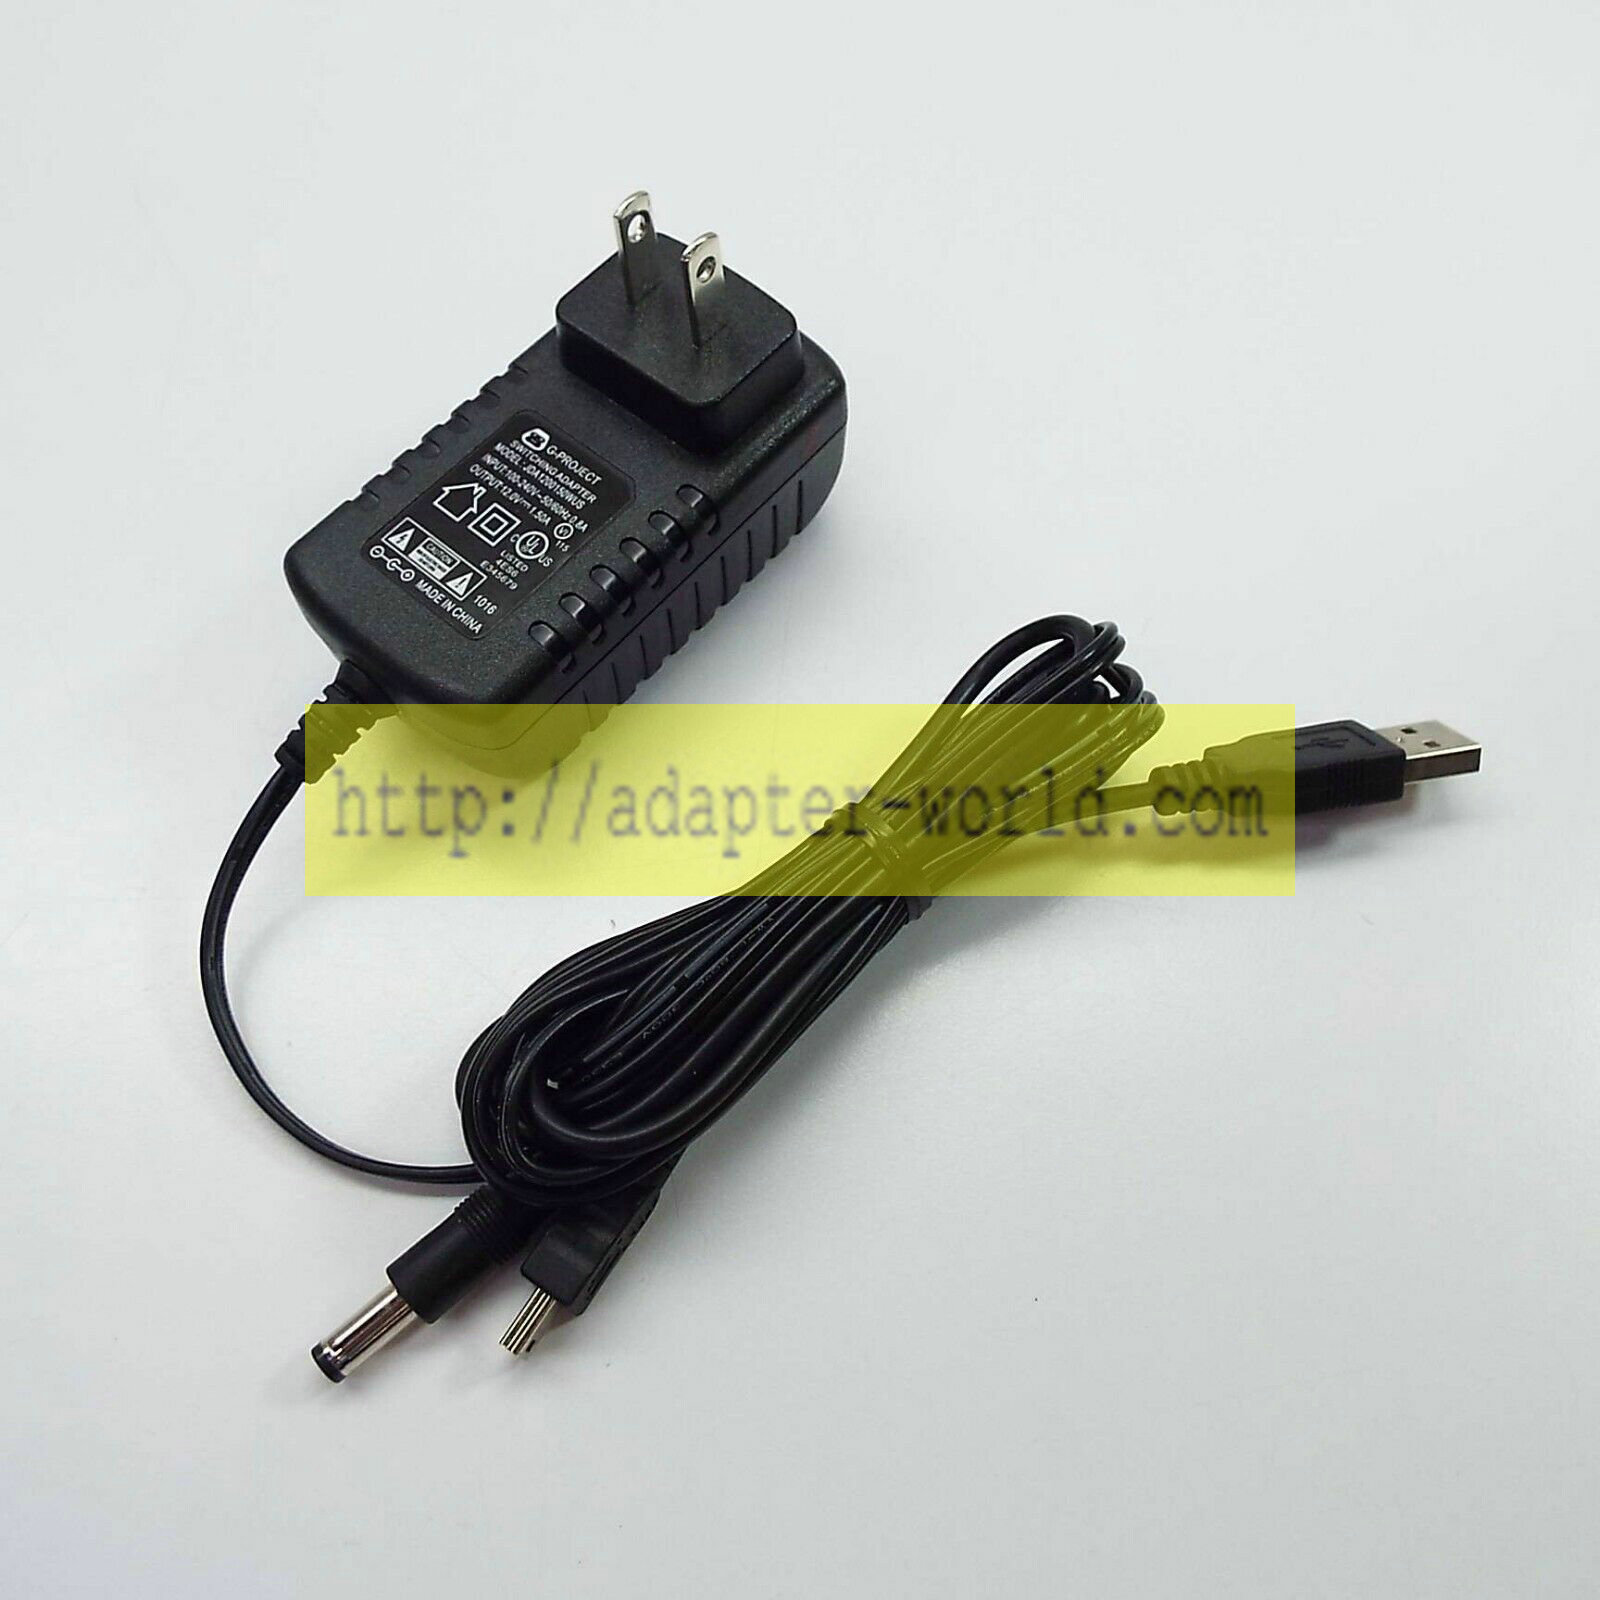 *Brand NEW* G-PROJECT JDA1200150WUS 12.0V 1.50A AC DC Adapter I2900 POWER SUPPLY